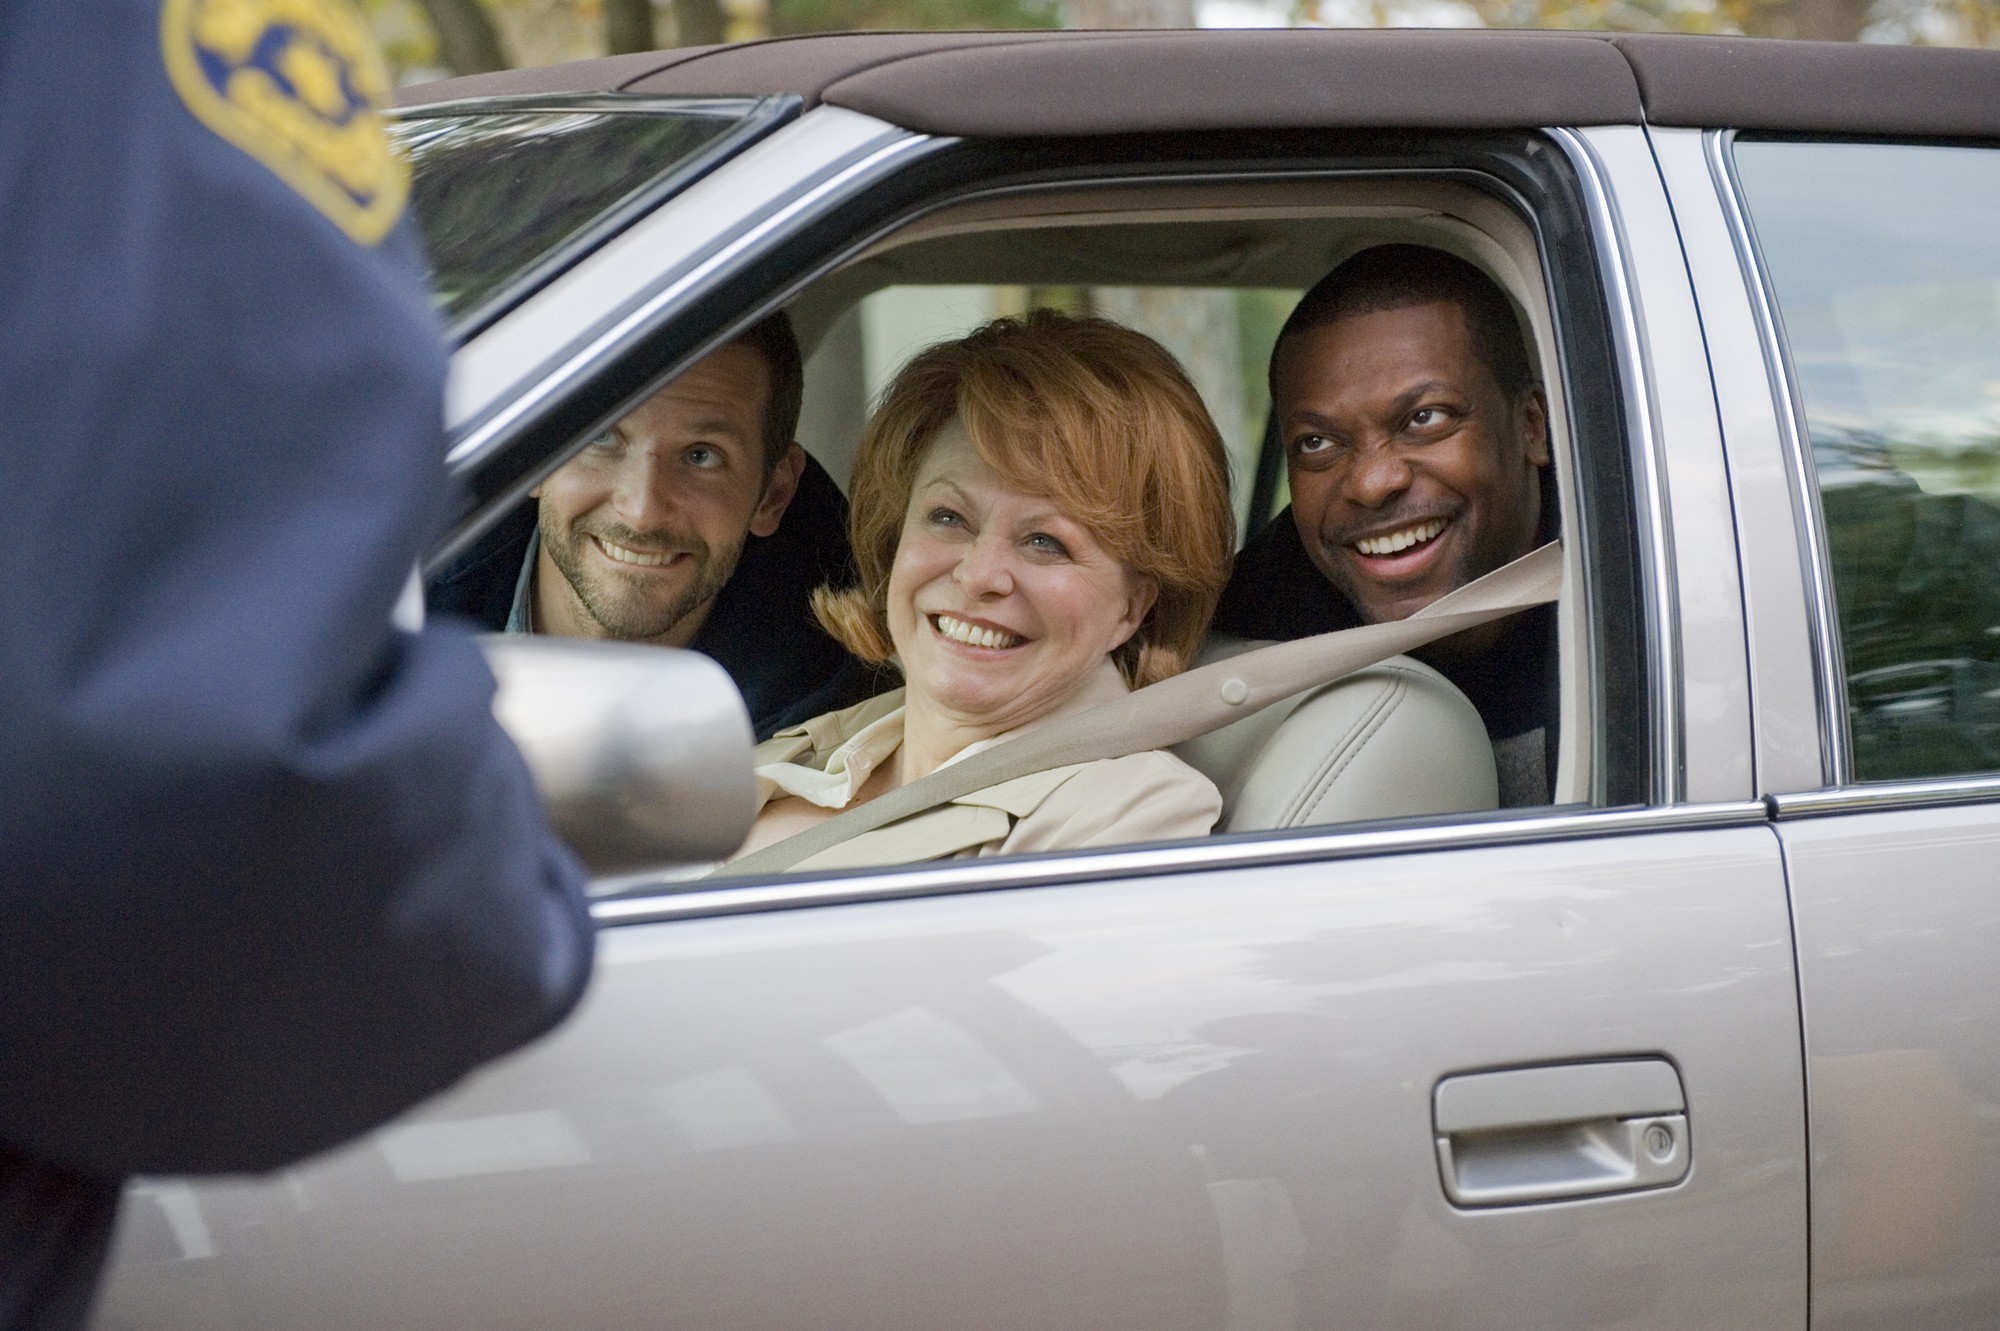 Bradley Cooper, Jacki Weaver and Chris Tucker in The Weinstein Company's Silver Linings Playbook (2013)